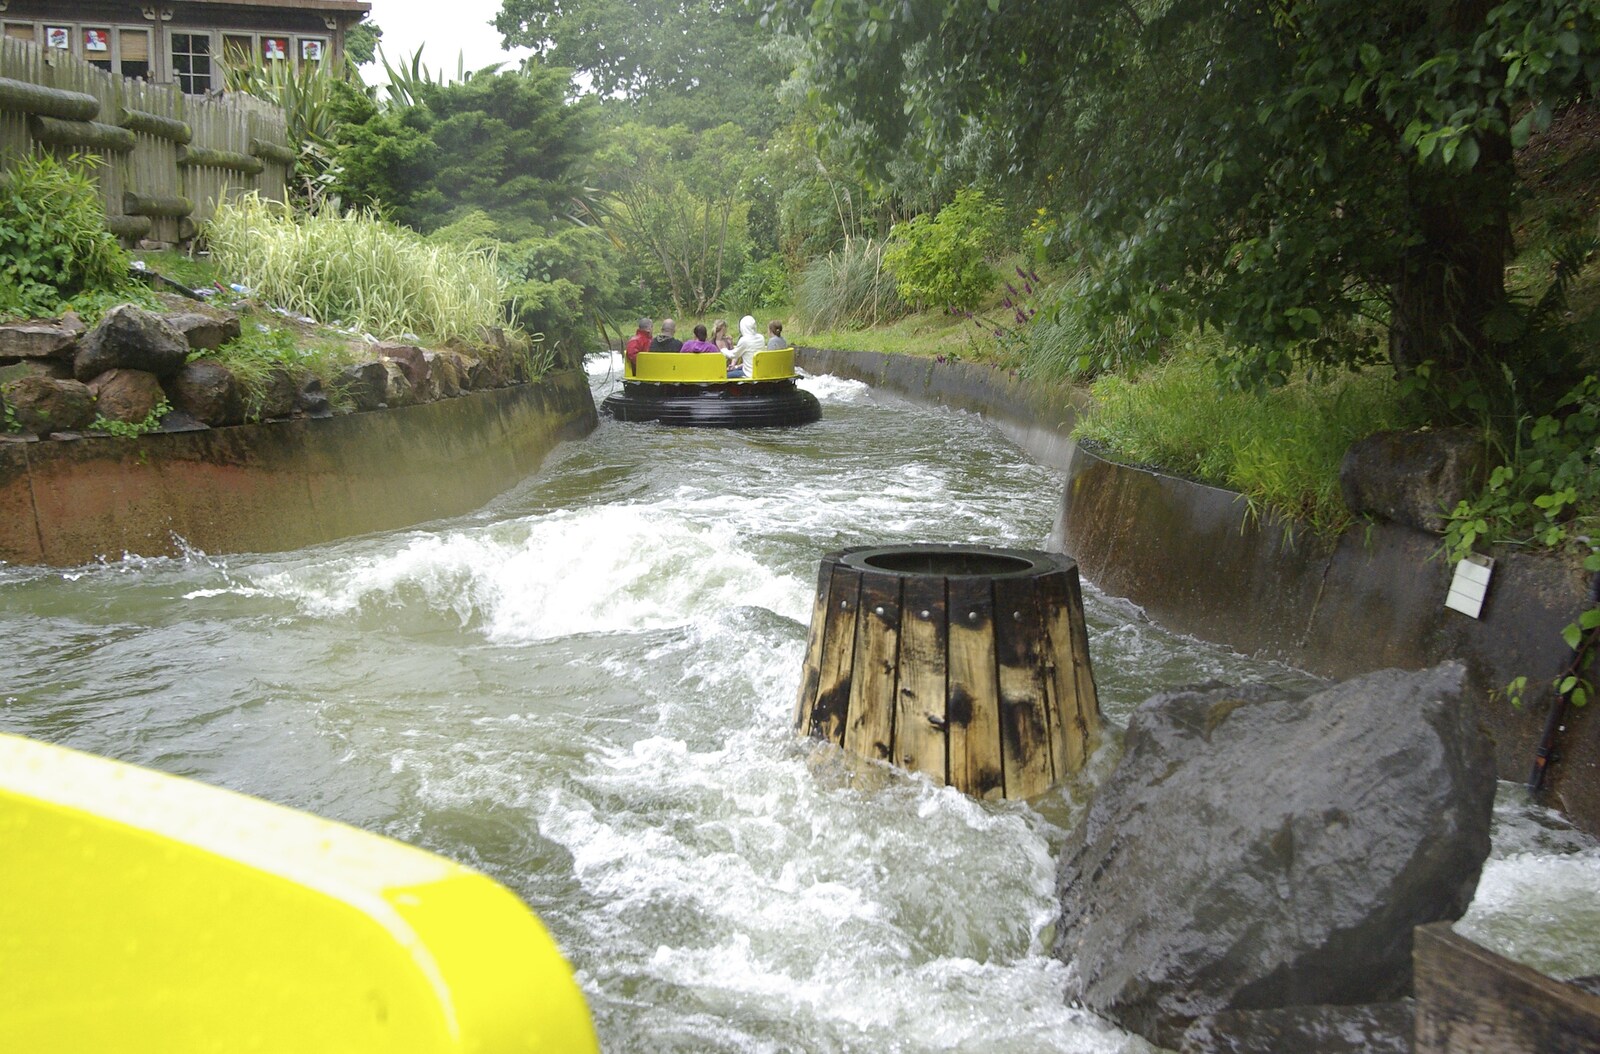 Qualcomm at Alton Towers, Staffordshire - 29th June 2008: On the rapids